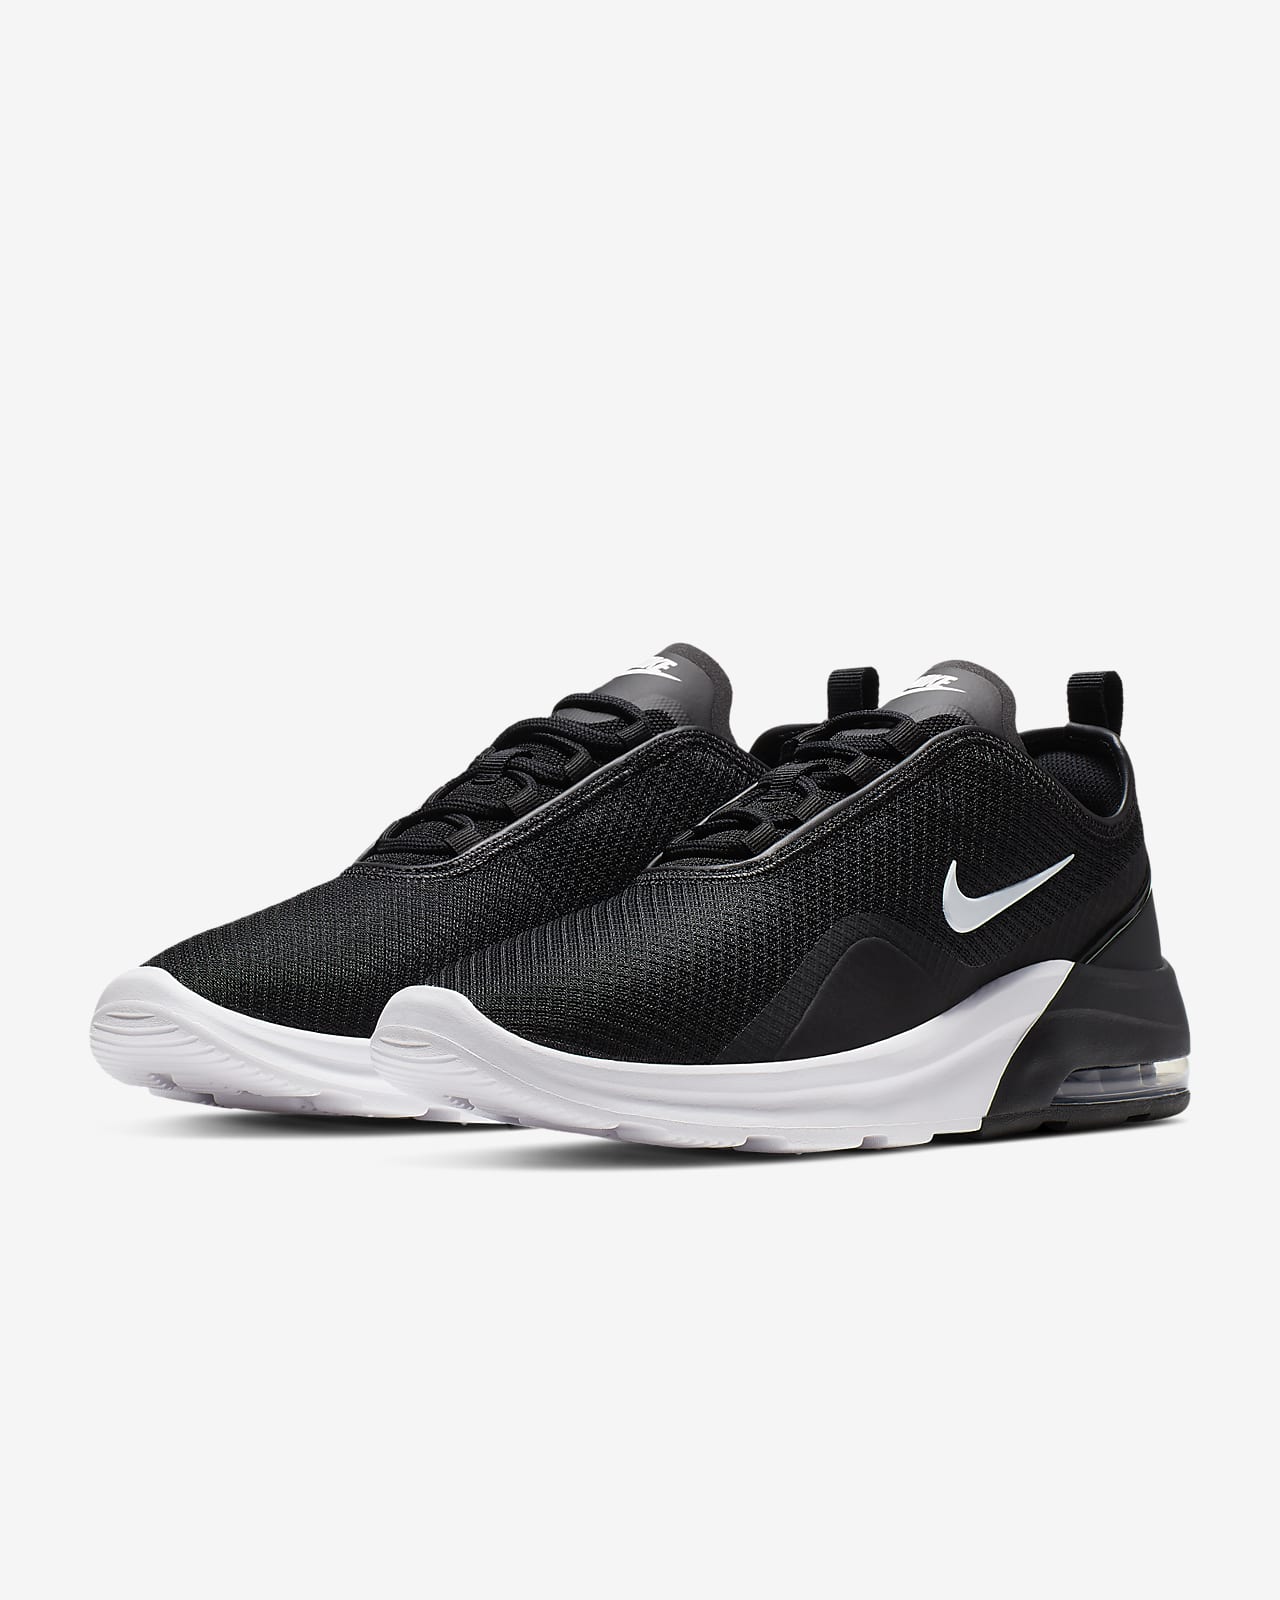 are nike air max motion good for running